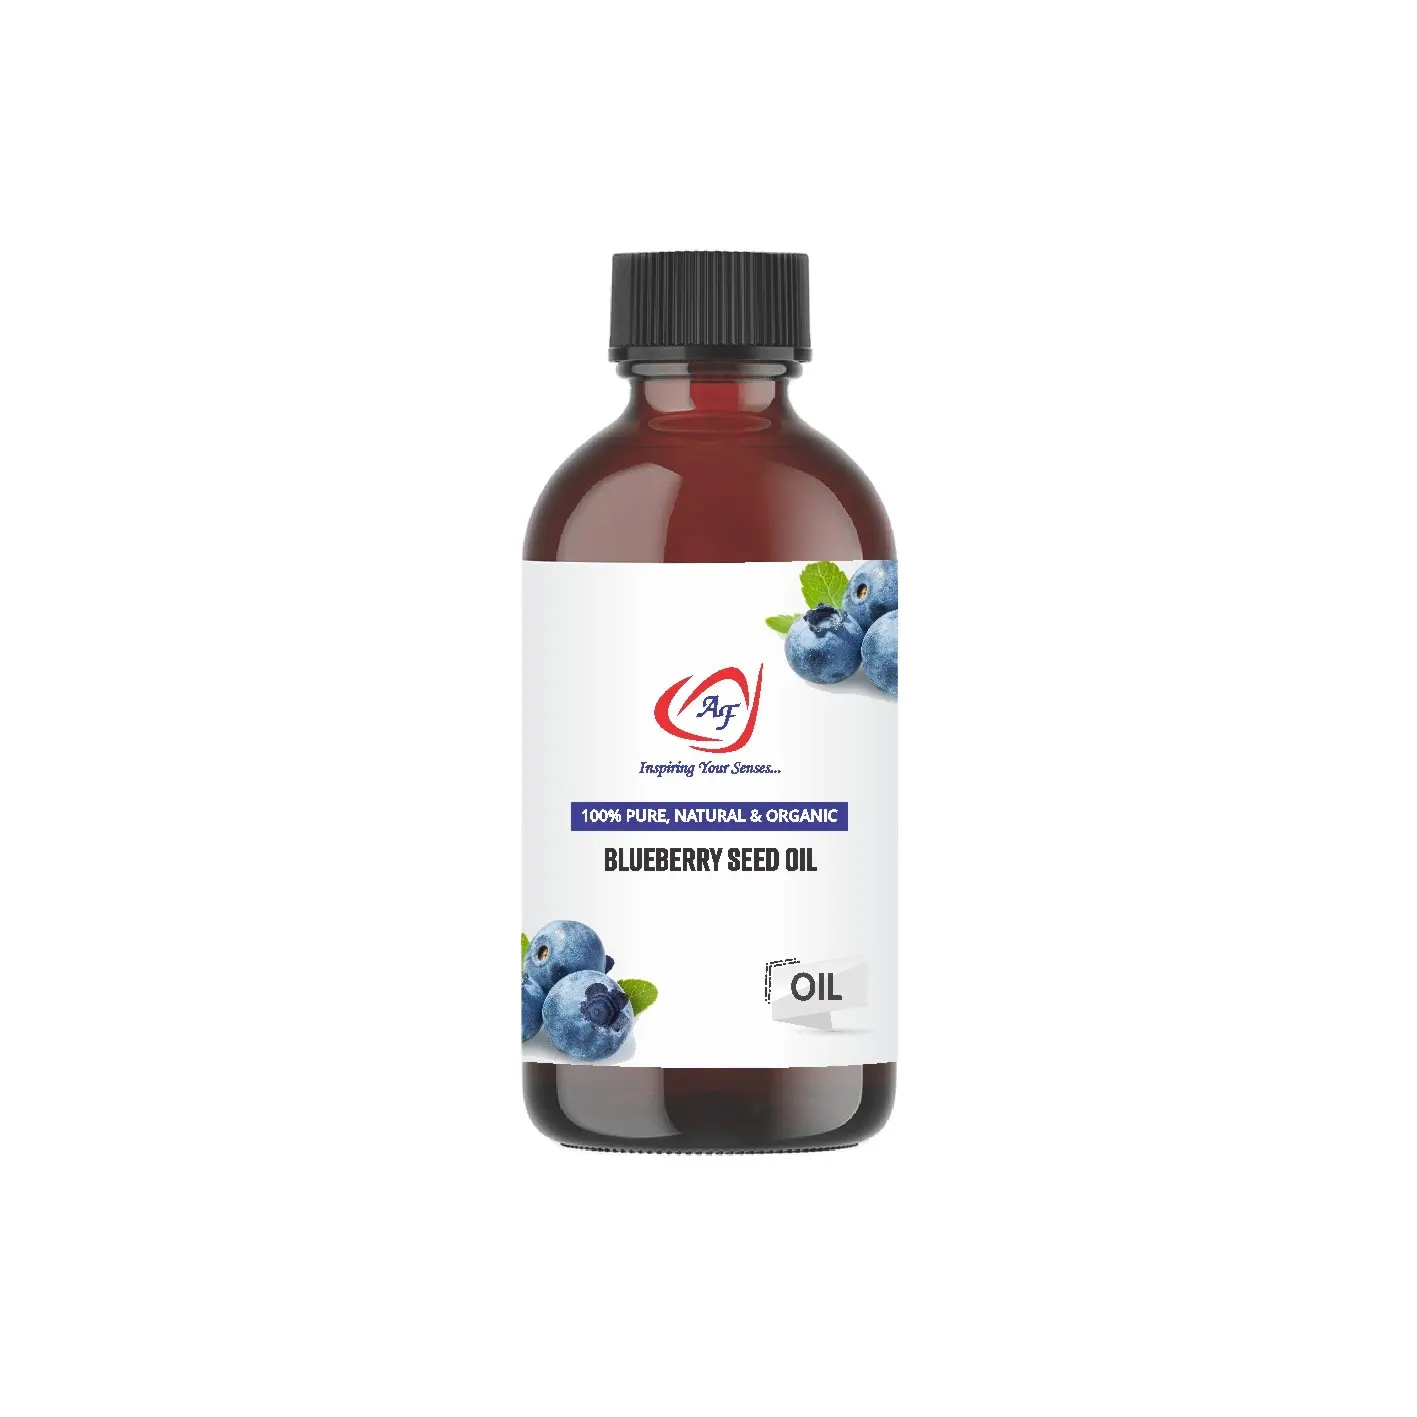 Blueberry Oil | Blue Berry Oil | Blueberry Seed Oil - Wholesale Bulk Price - Natural and Organic Cold Pressed Carrier Oils